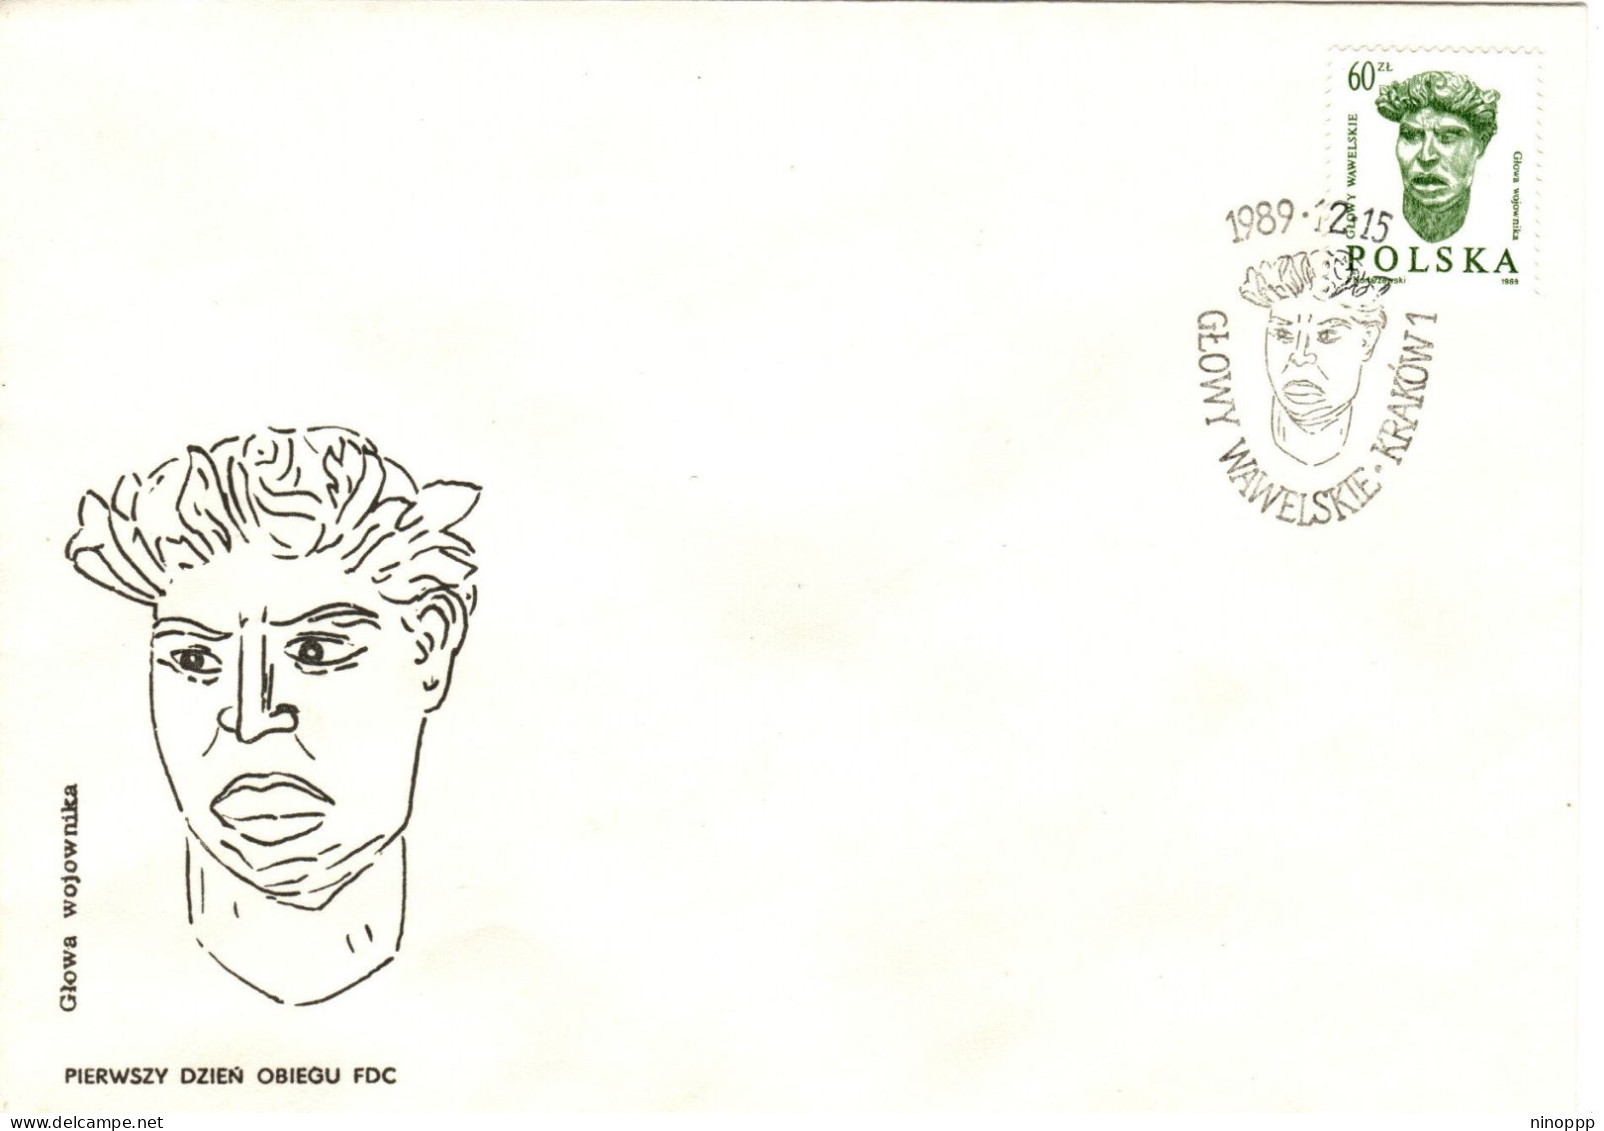 Poland 1989 Wawel Heads 60zl Green,first Day Cover - FDC